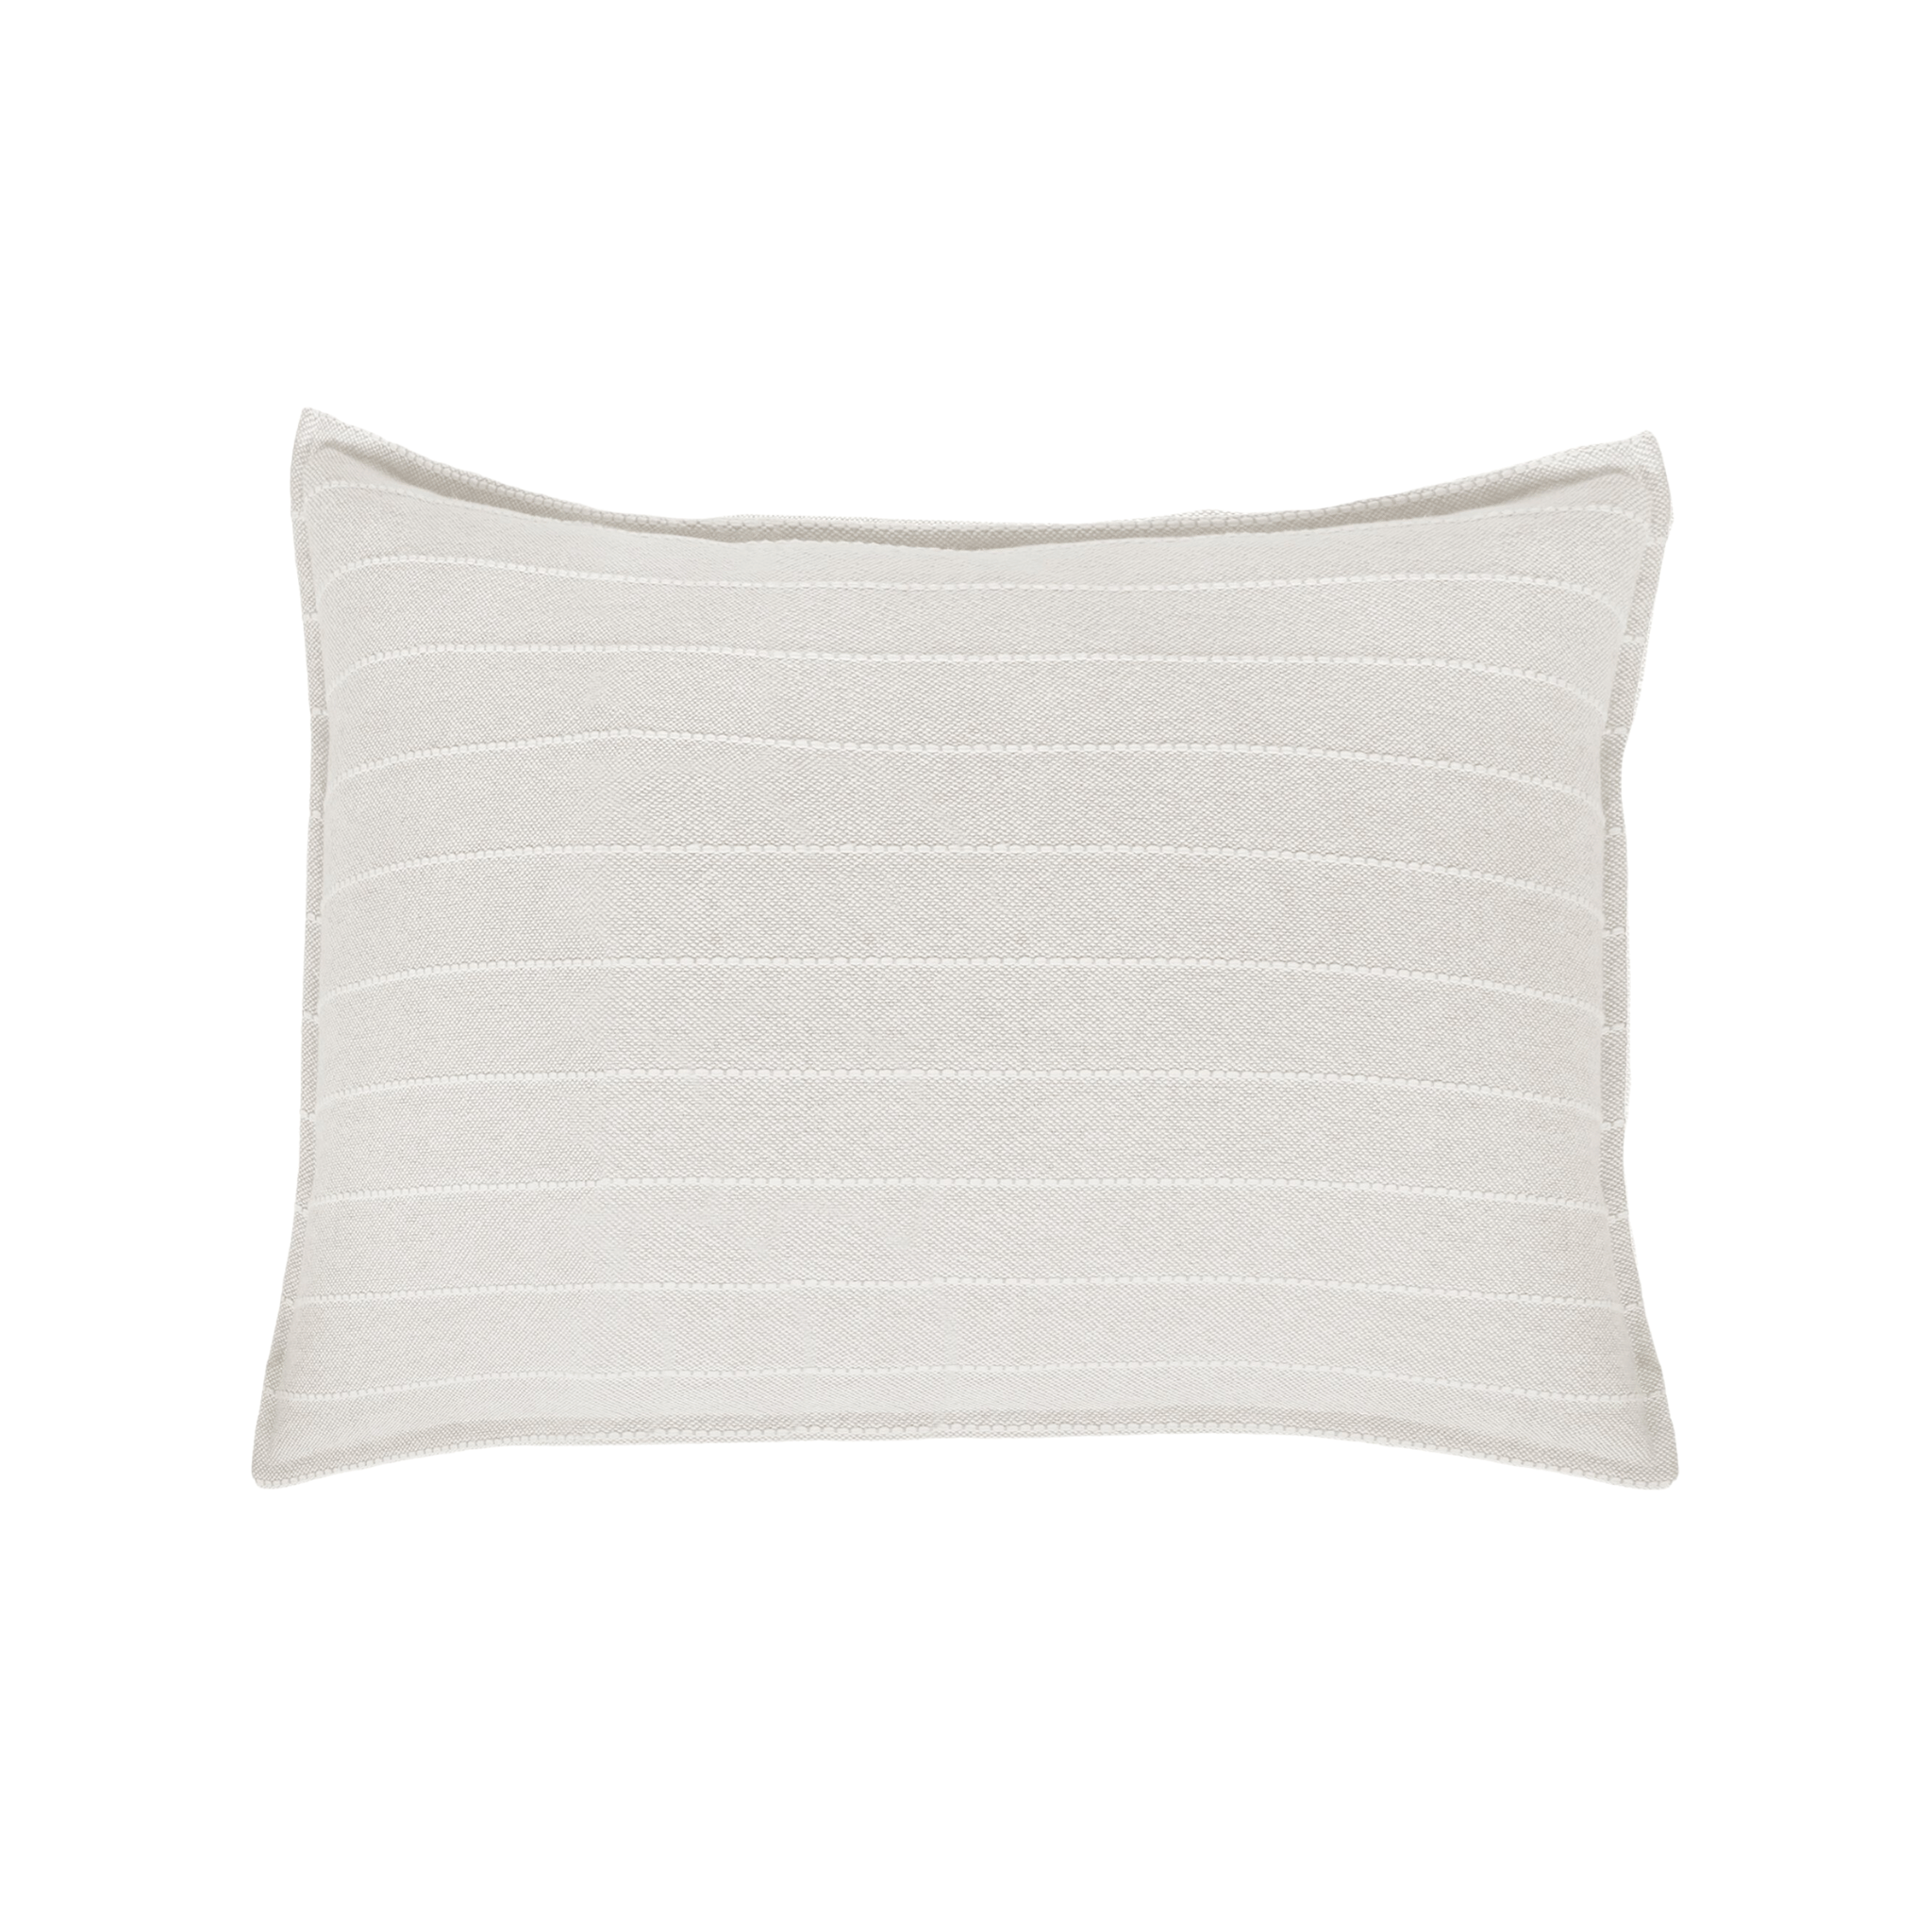 HENLEY BIG PILLOW 28&quot; X 36&quot; WITH INSERT - 2 COLORS-Pom Pom at Home